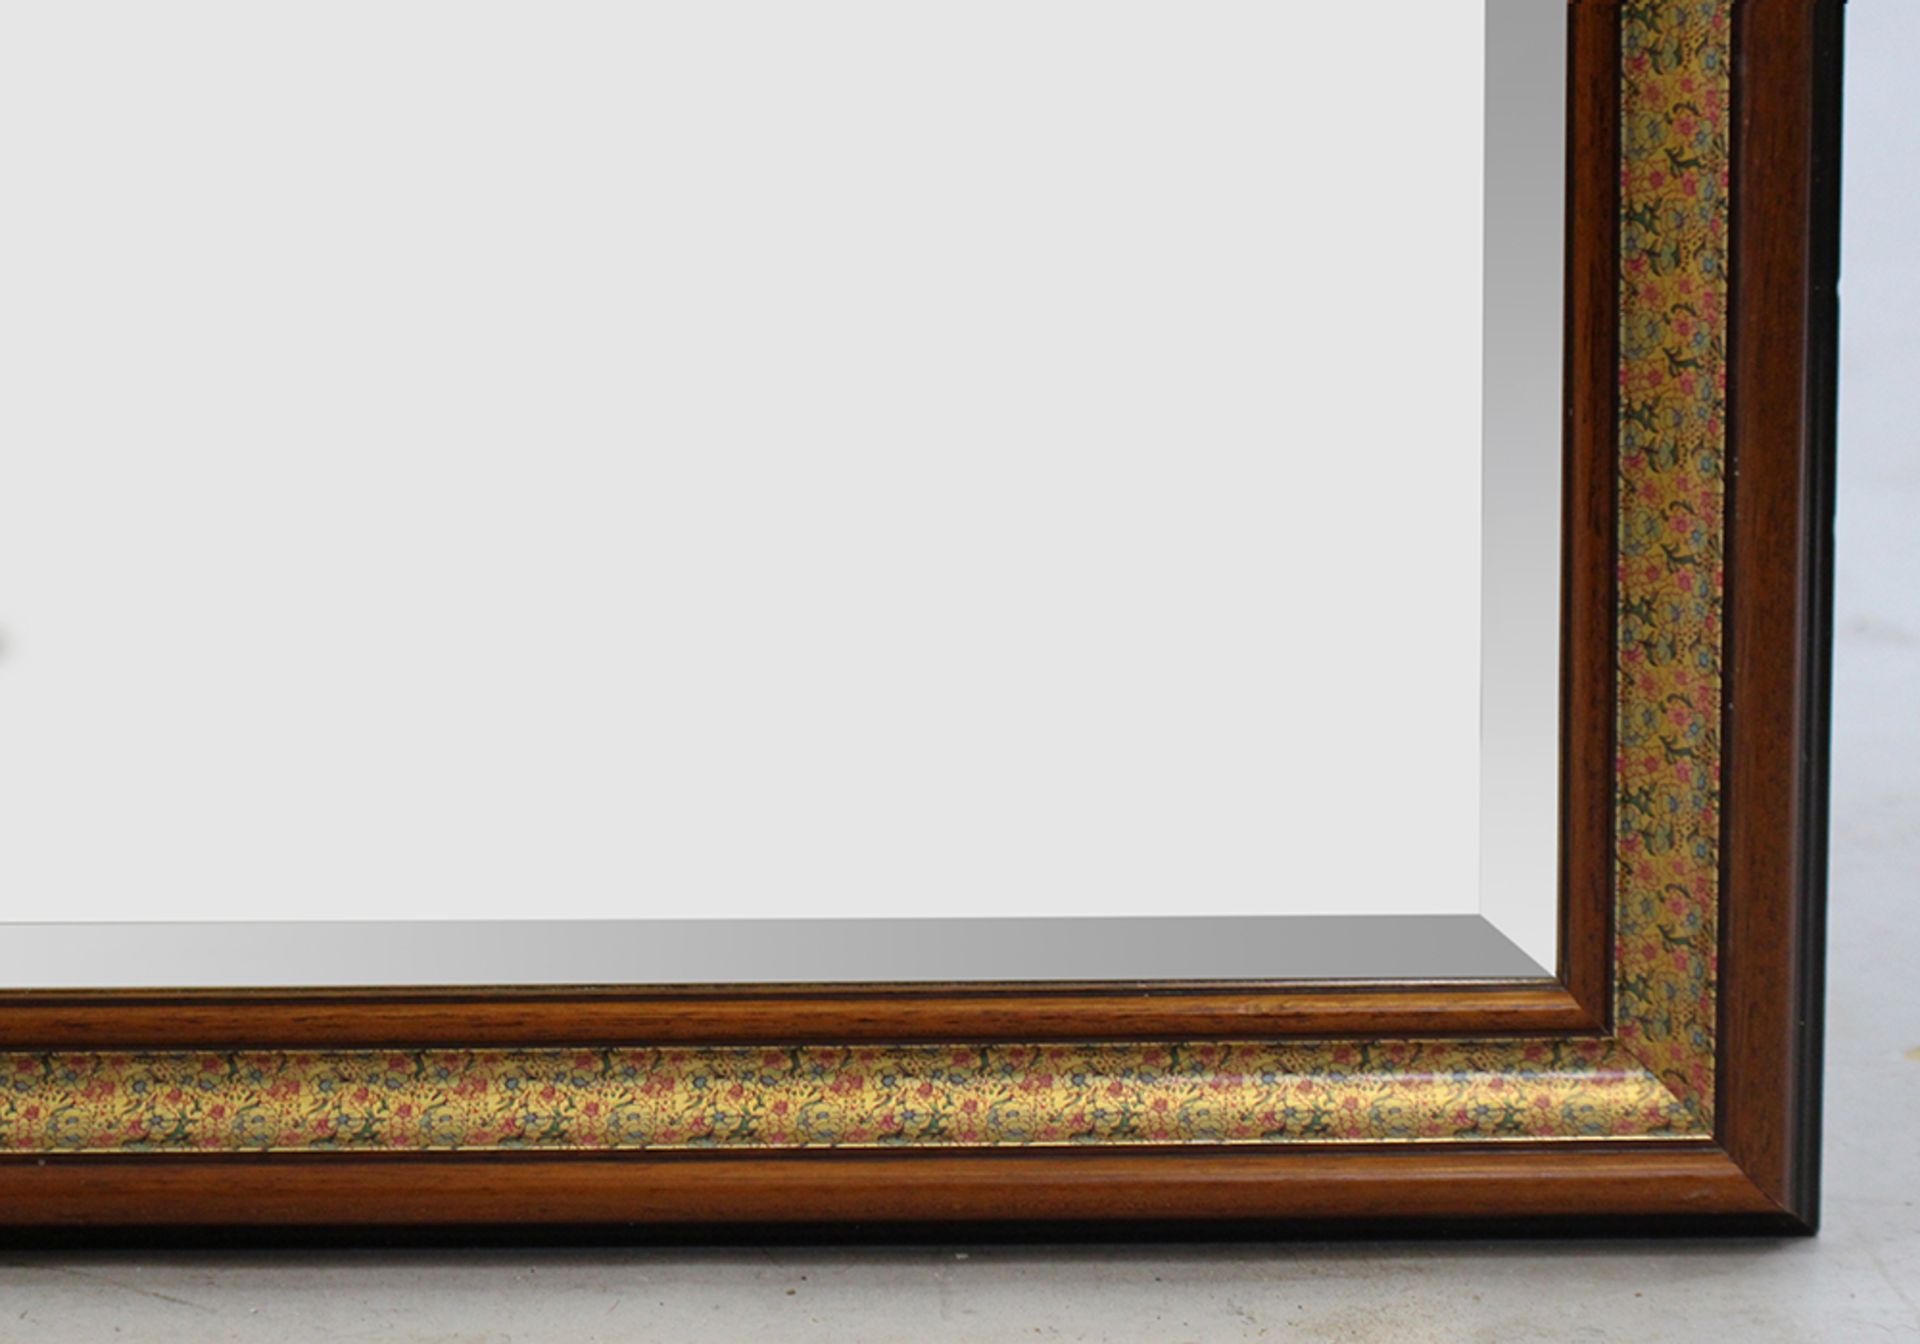 Large Mahogany Bevelled Glass Mirror 71 x 124 cm - Image 2 of 3